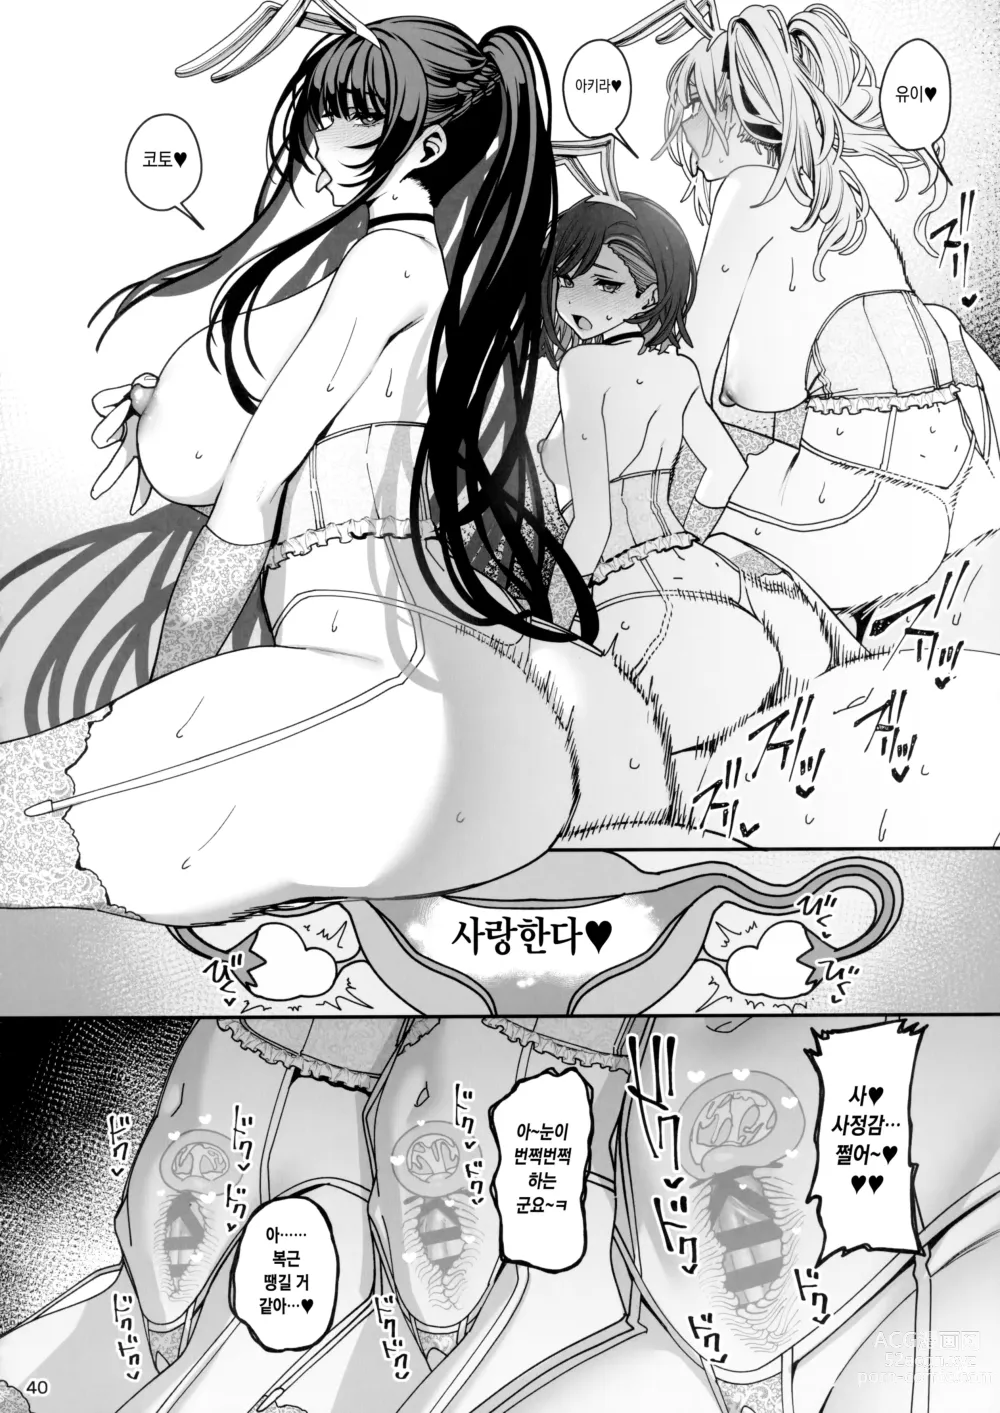 Page 41 of doujinshi 여친 최면 3